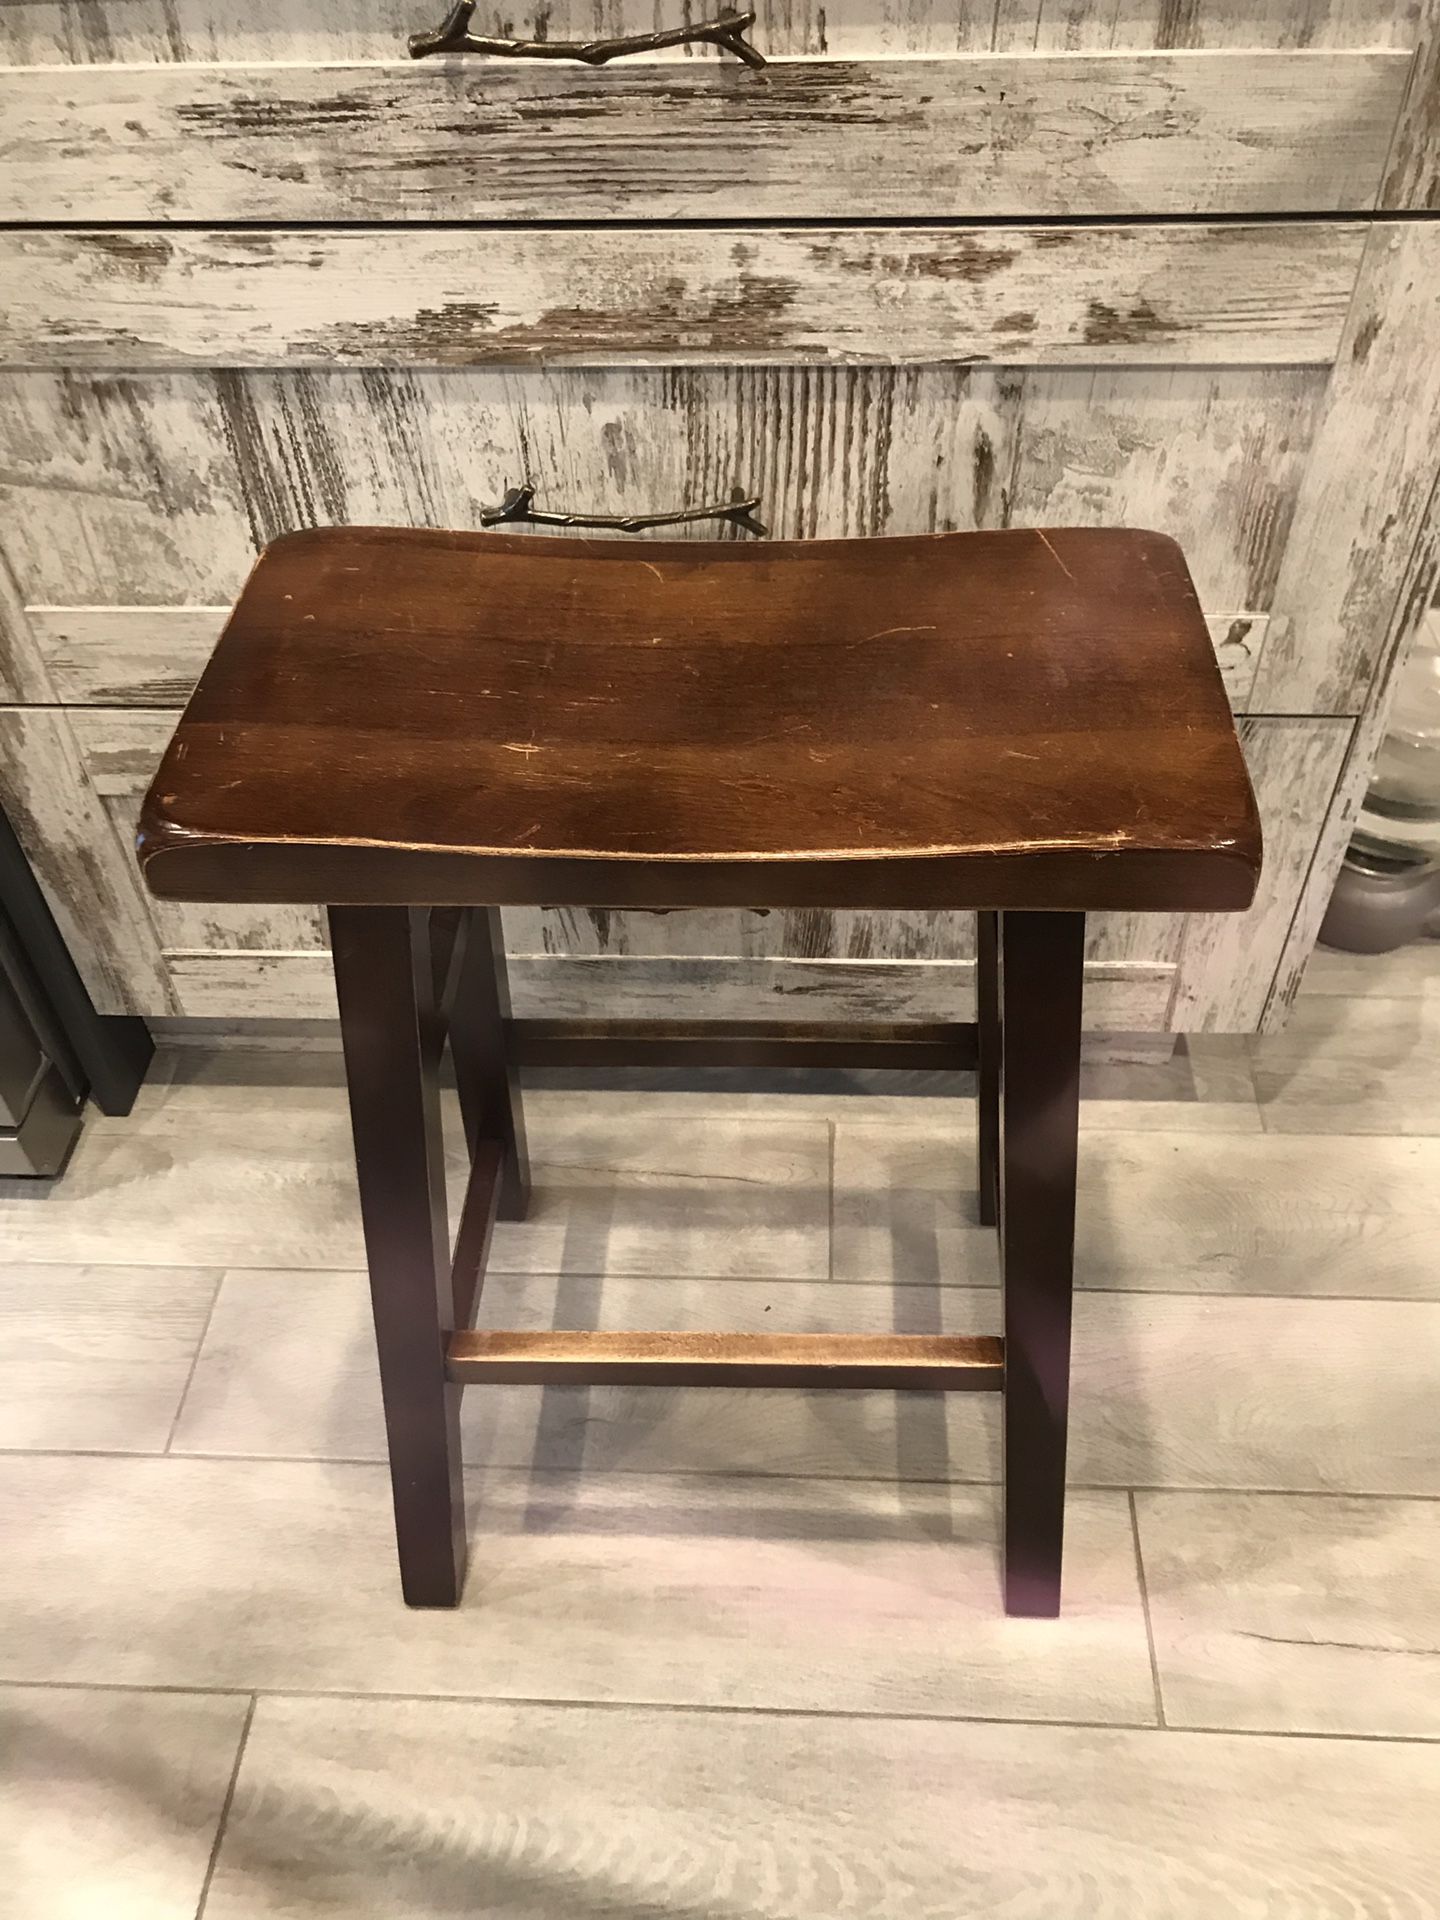 Counter height stools